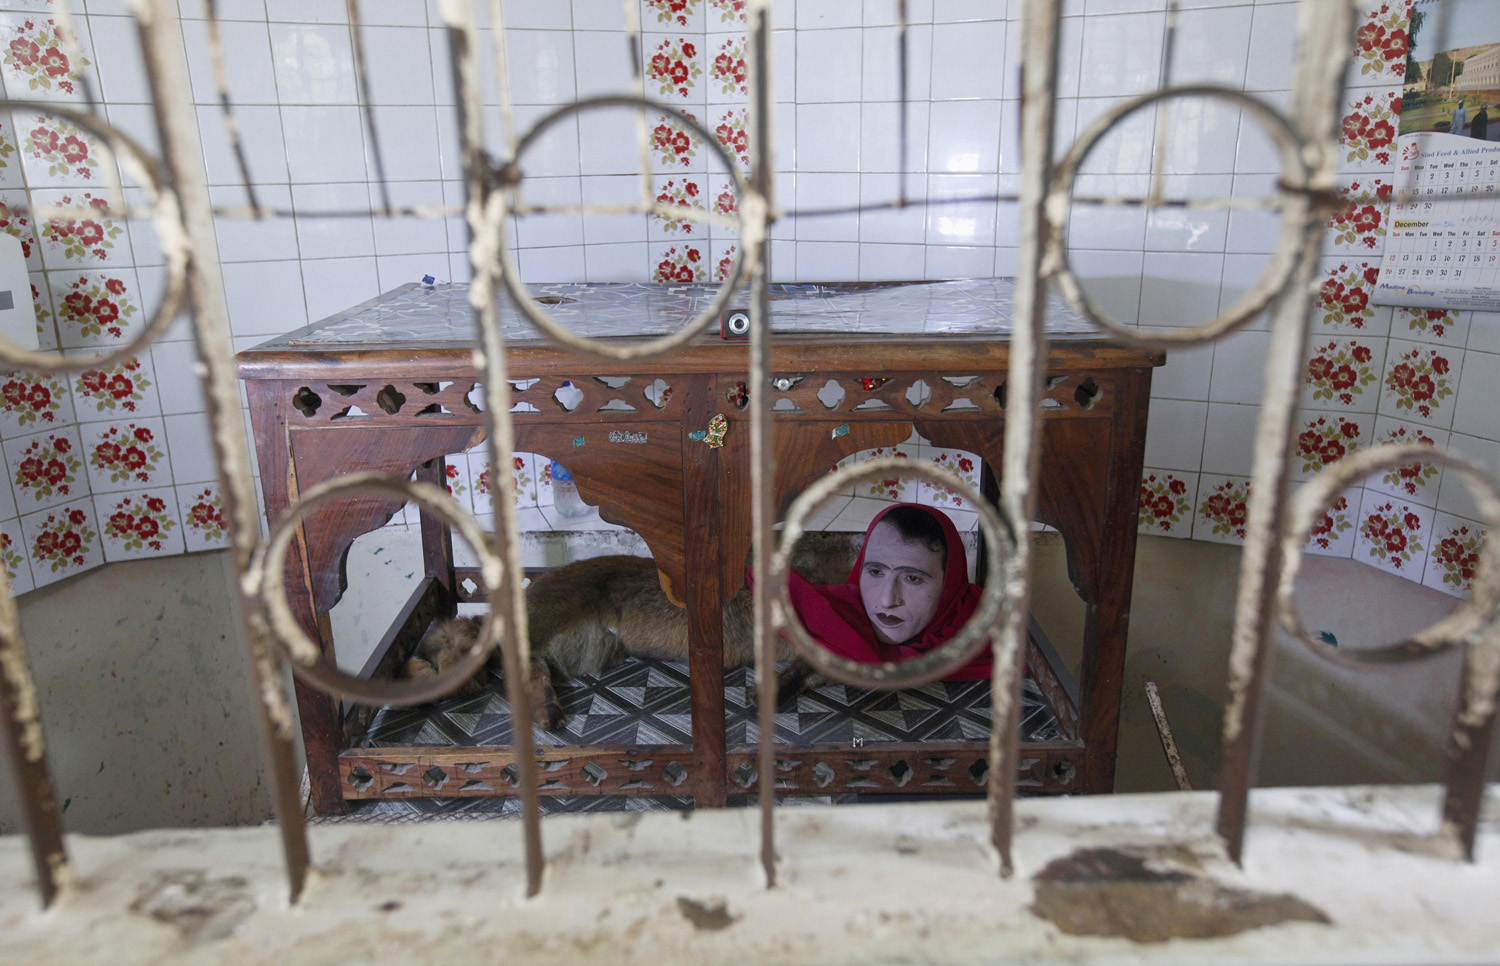 An entertainer performing as the character  Mumtaz Begum , a fox-human hybrid creature, sits inside a wooden canopy in a small room called Mumtaz Mahal (Mumtaz Palace), to amuse visitors at Karachi Zoo in Karachi, Pakistan on June 20, 2014.